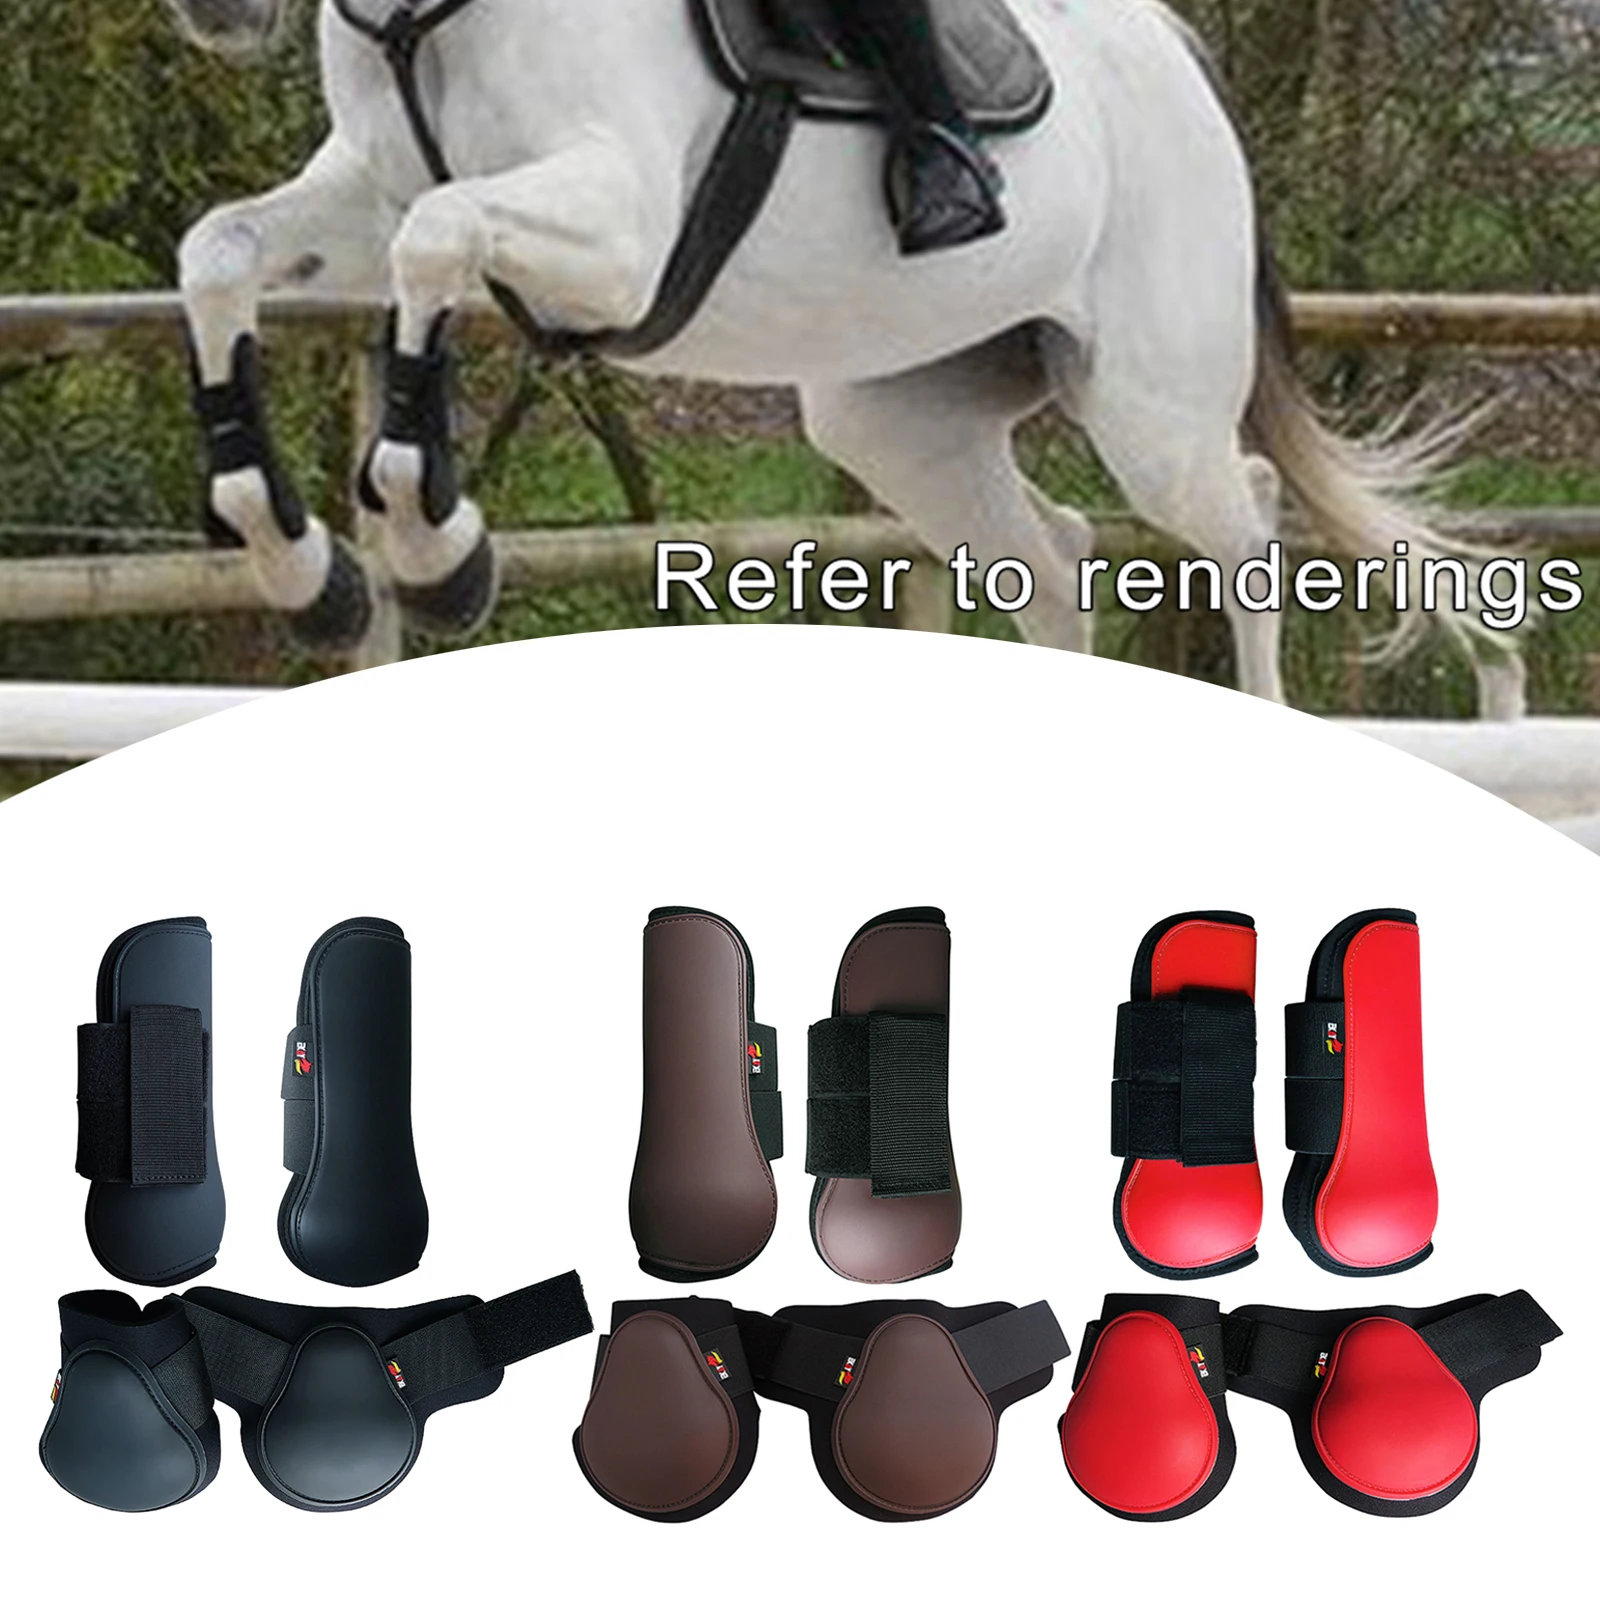 Horse Tendon Boots (4 pcs - Front & Hind), PU Shell Tendon Fetlock Brace Guard Boots for Riding Jumping Competition Protection